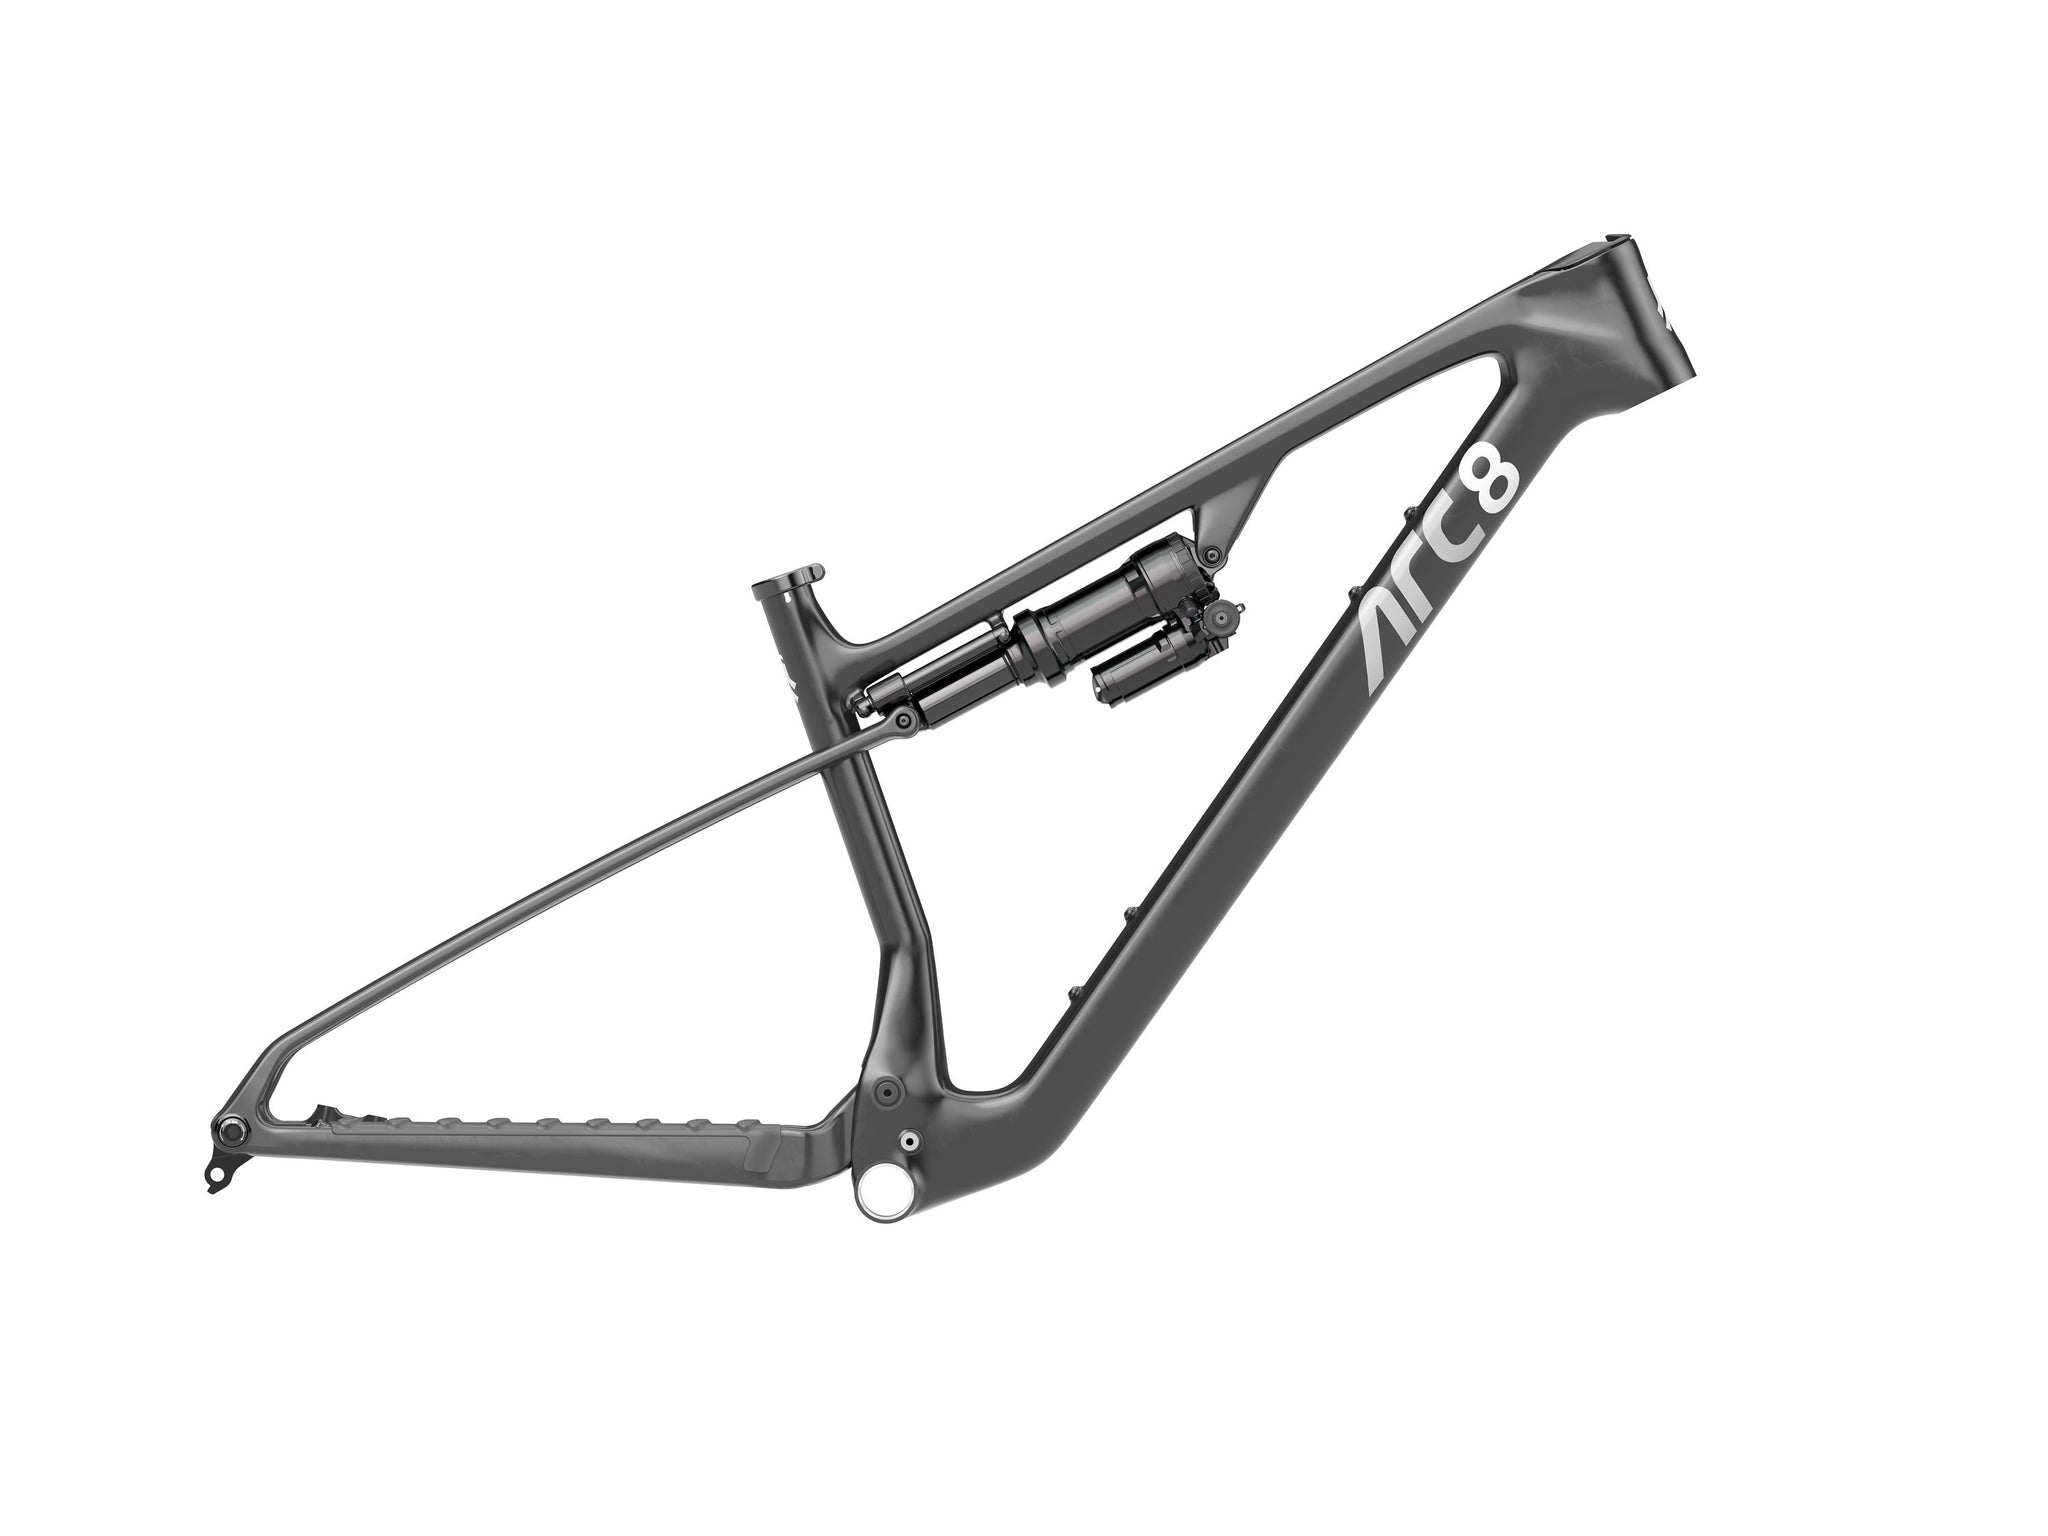 2023 ARC8 Essentiall II Frame including Rockshox Super Deluxe Select+